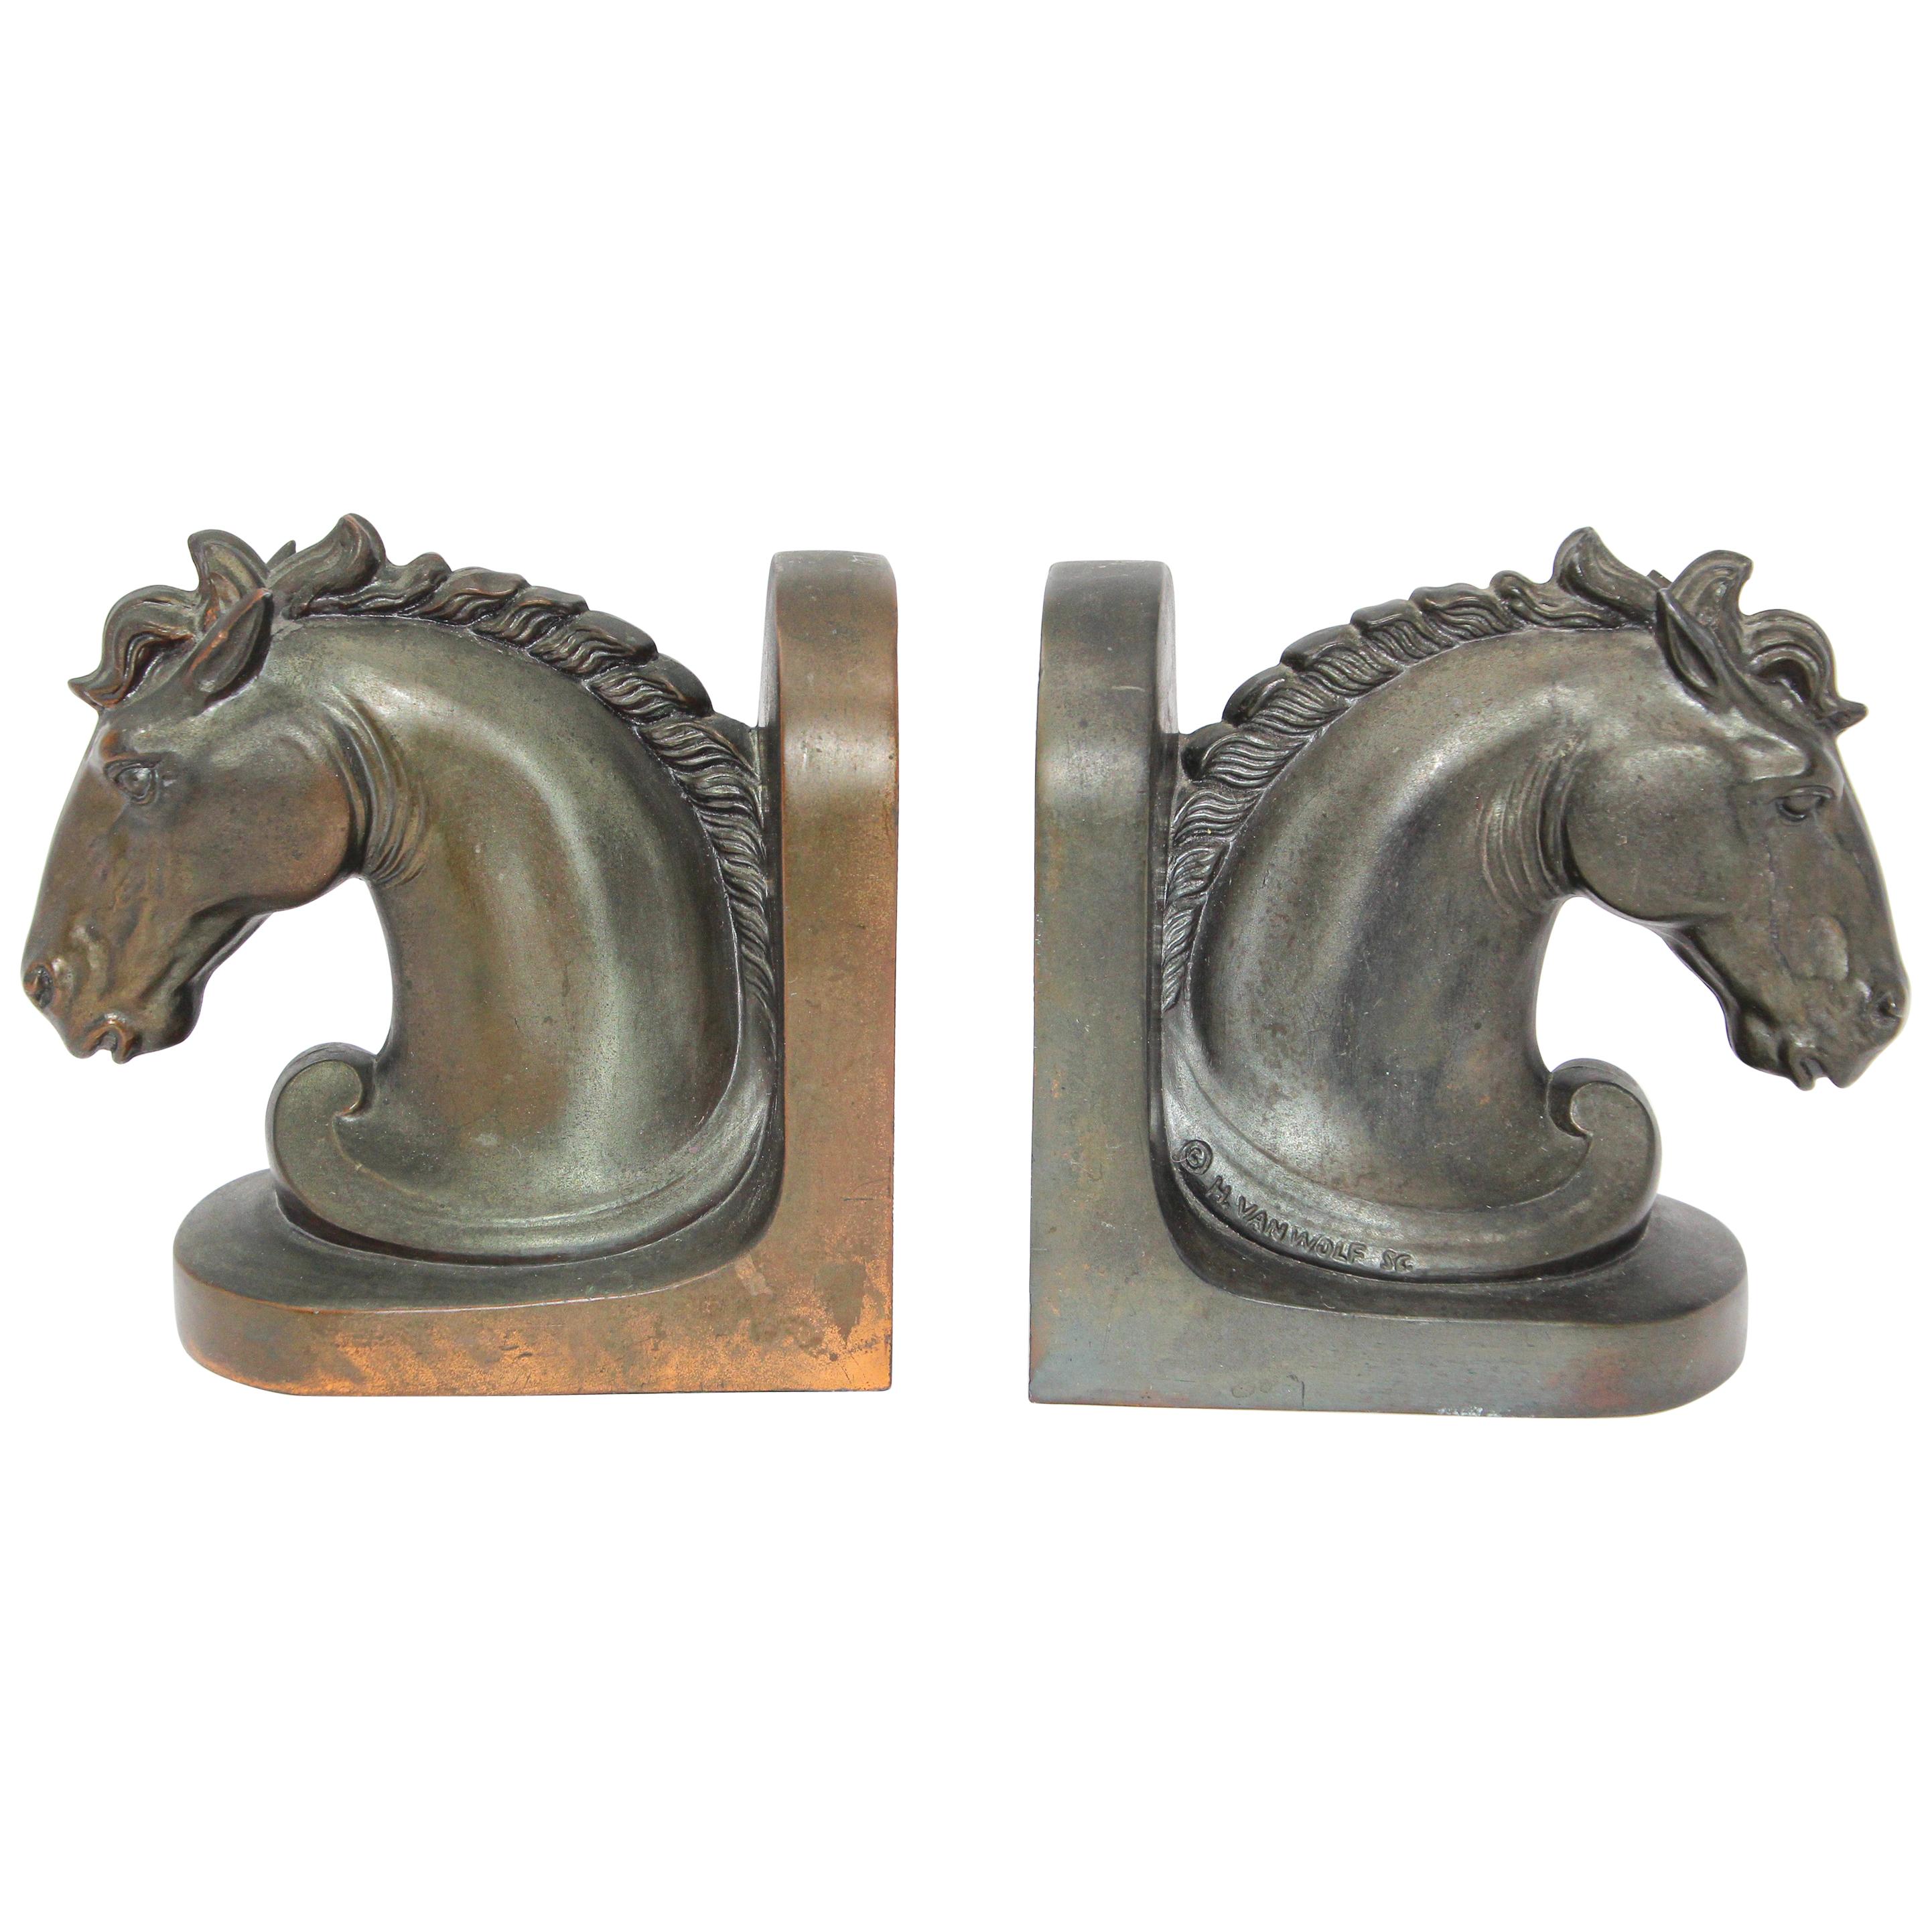 Art Deco Stylized Cast Bronze Sculptures of Horse Bust on Stand Bookends